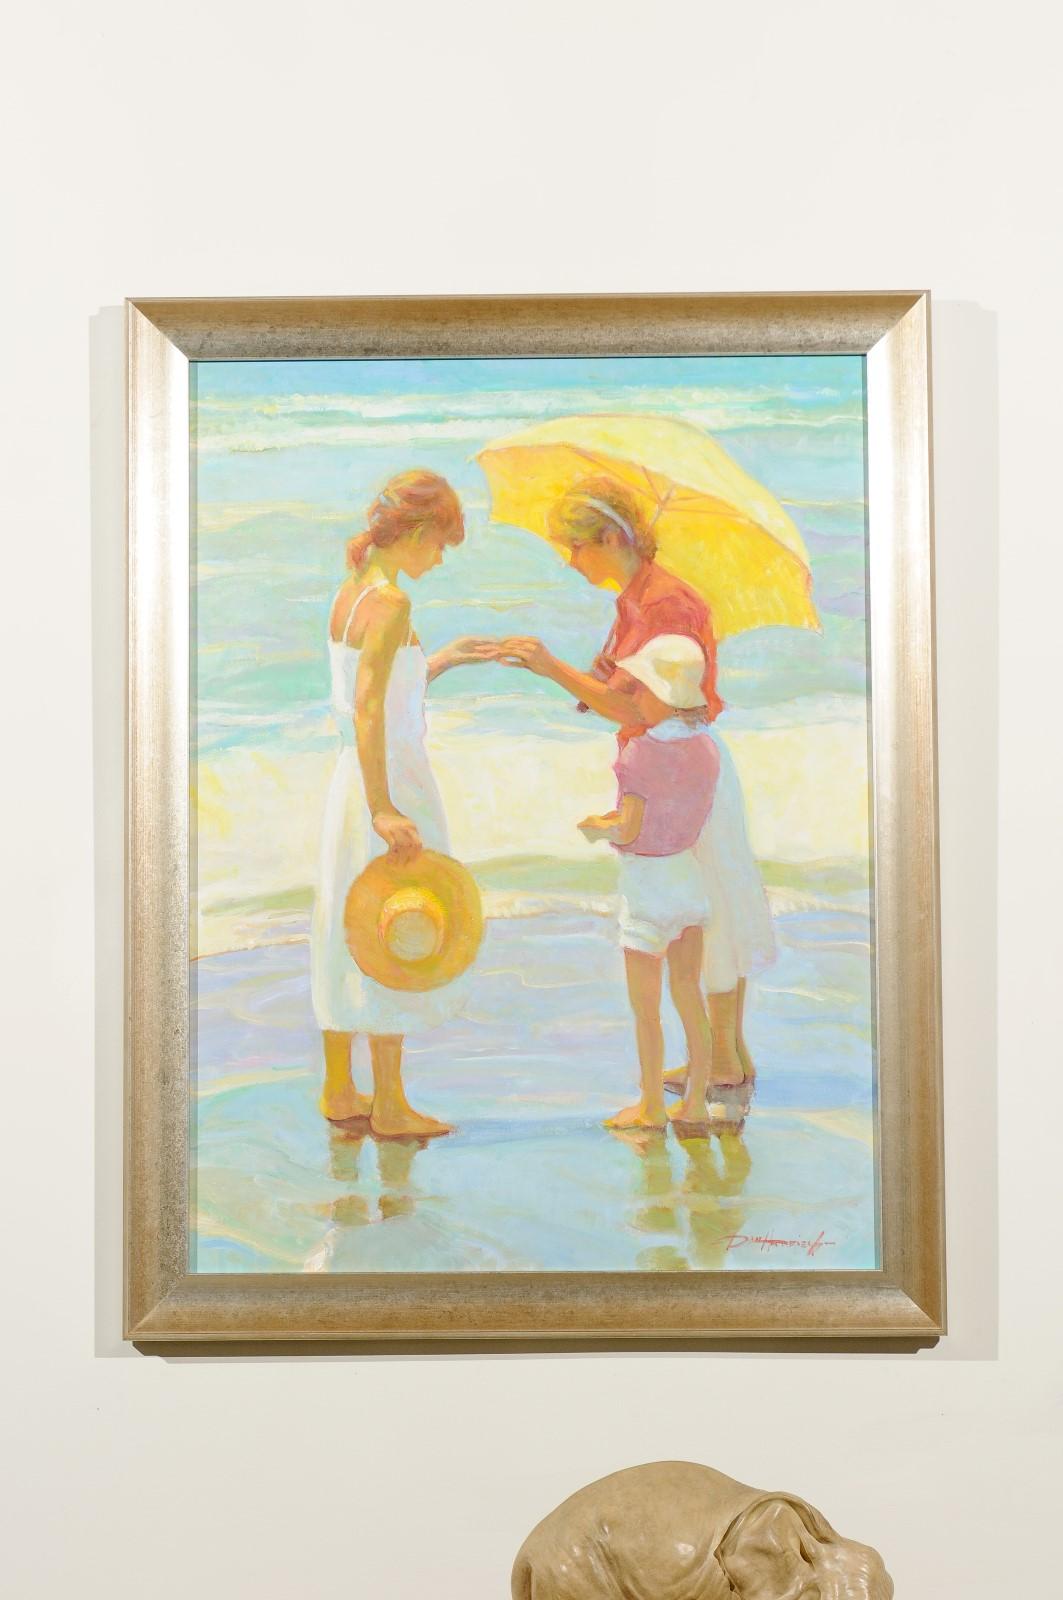 Wood Friends, Don Hatfield Framed Contemporary Vertical Figurative Beach Oil Painting